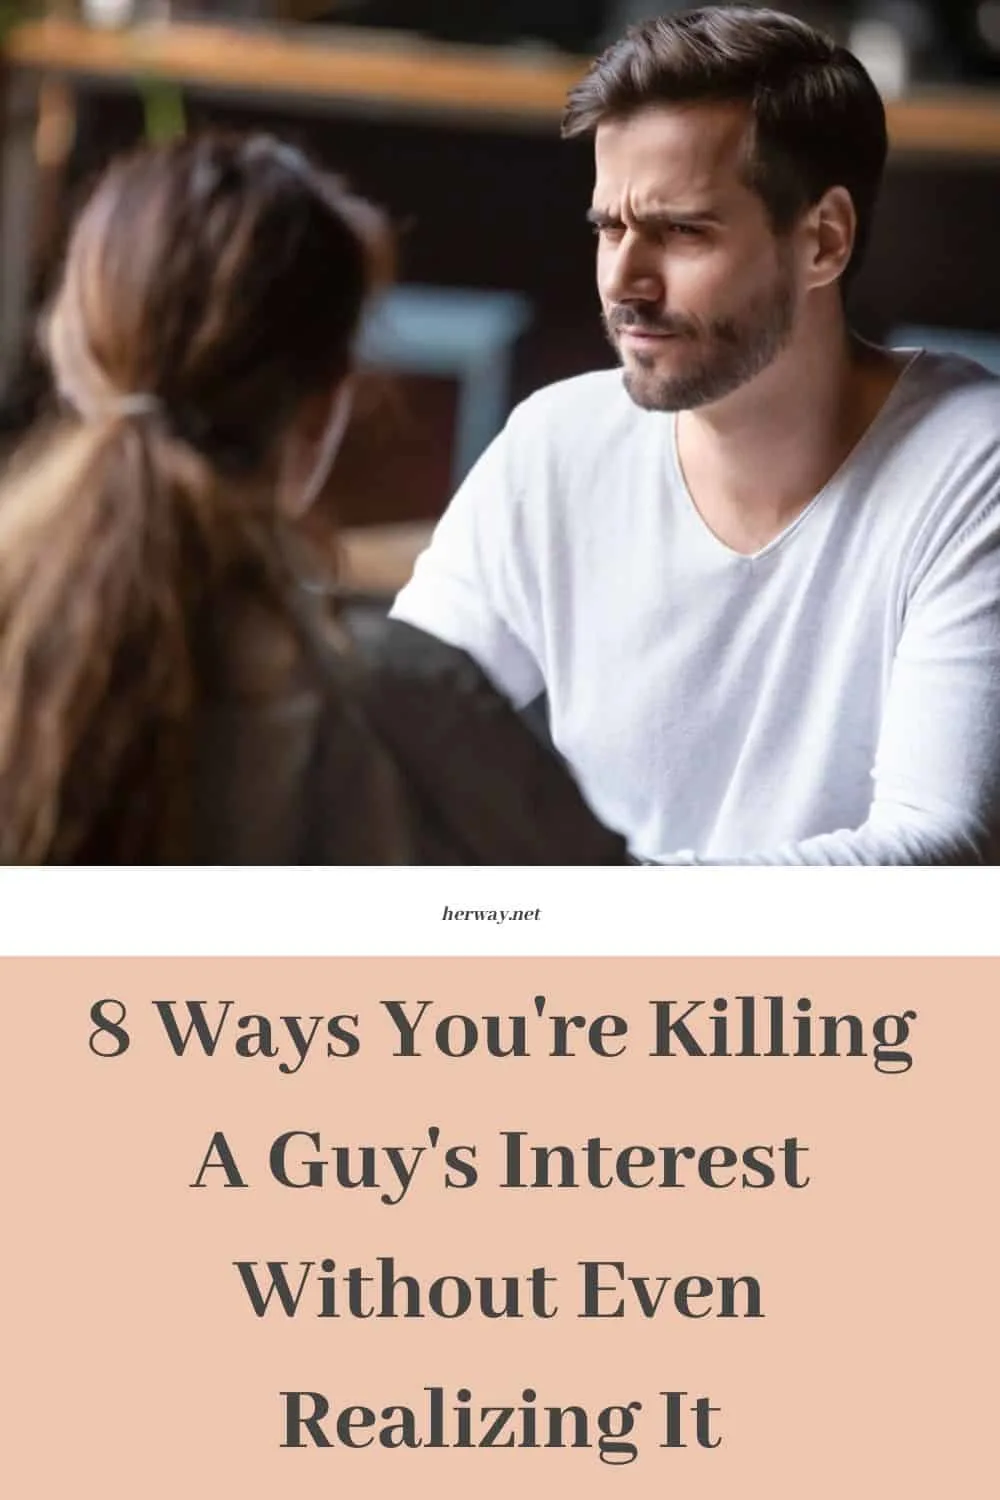 8 Ways You're Killing A Guy's Interest Without Even Realizing It